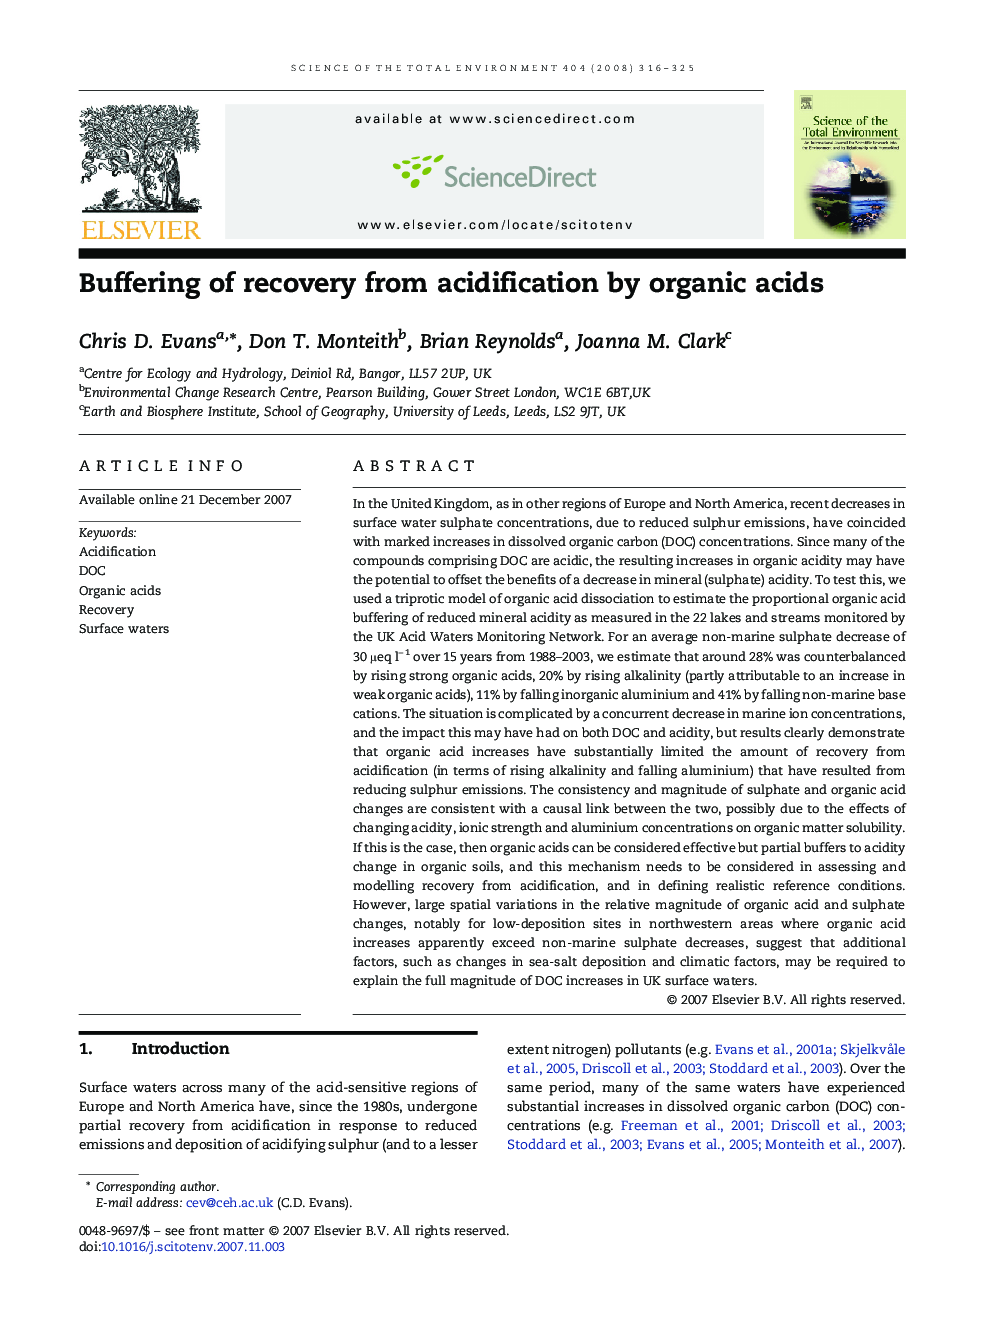 Buffering of recovery from acidification by organic acids